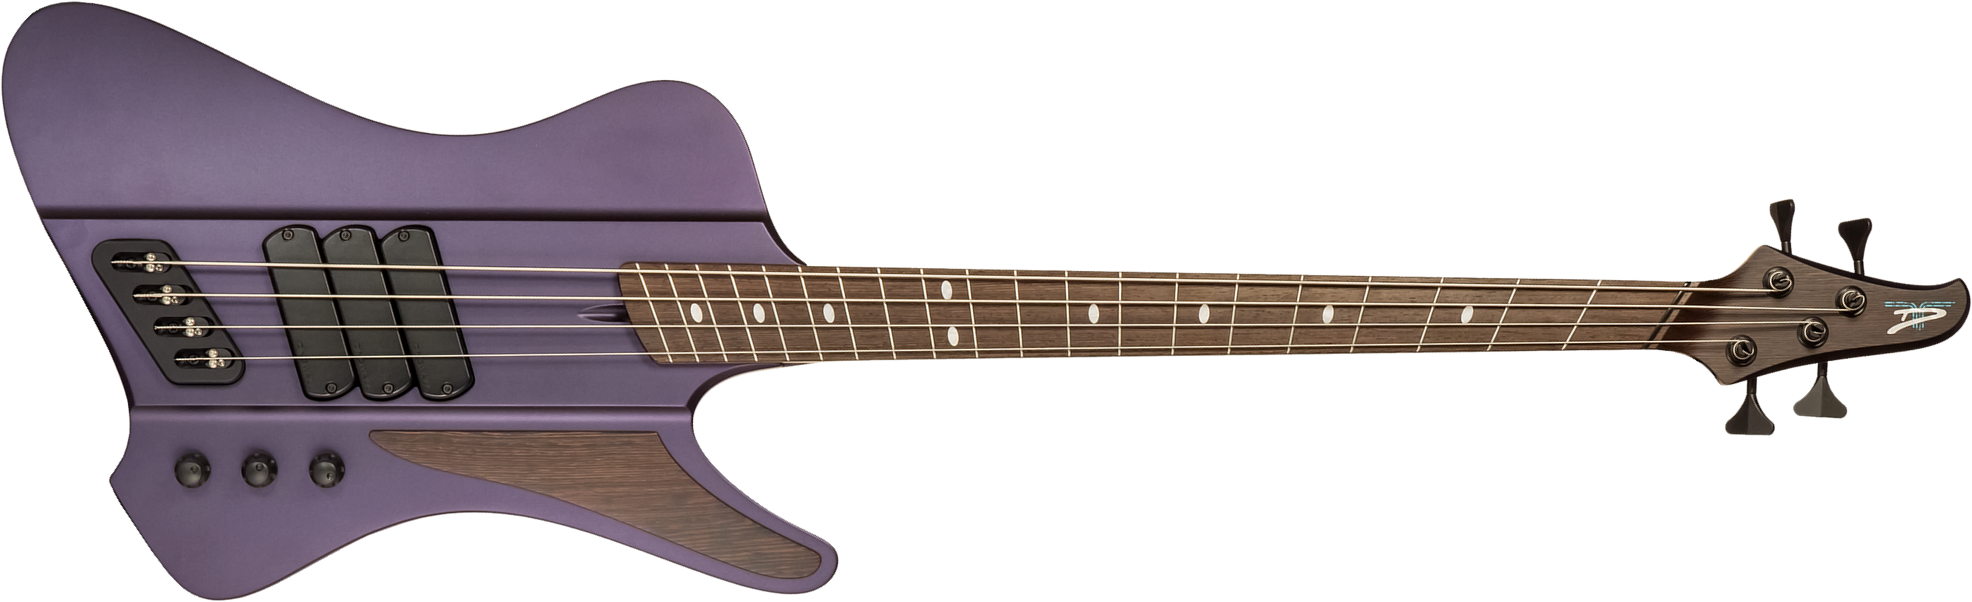 Dingwall Custom Shop D-roc 4c 3-pickups Wen #6982 - Purple To Faded Black - Solid body electric bass - Main picture